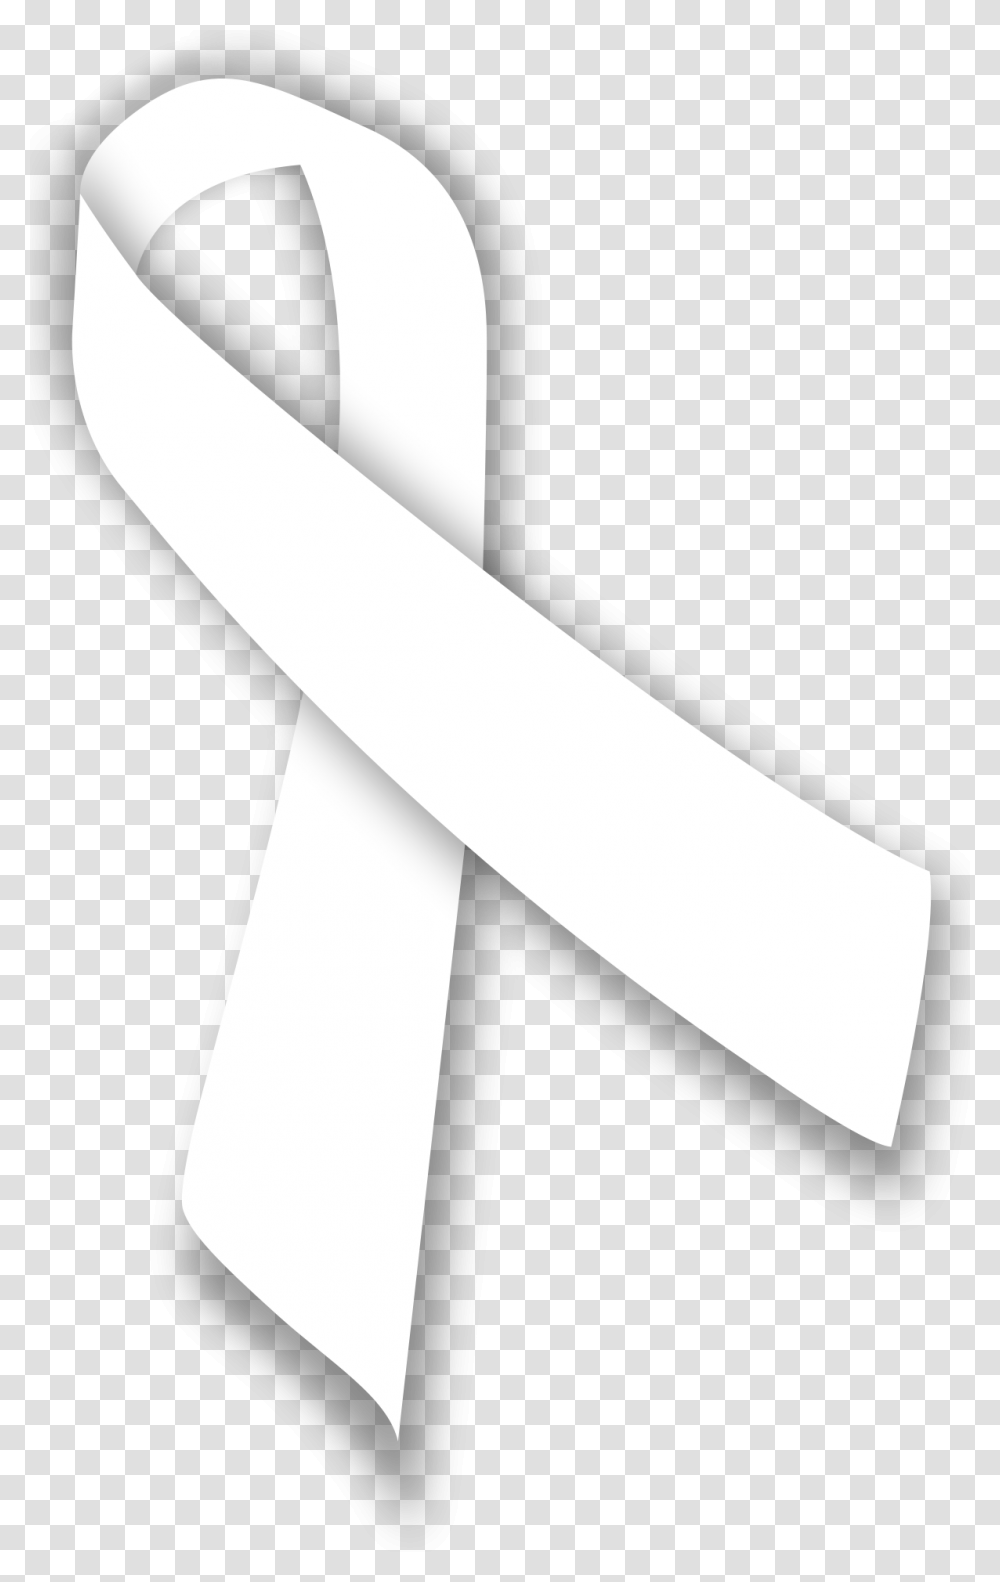 White Ribbon Lung Cancer Ribbon, Weapon, Weaponry, Sword, Blade Transparent Png